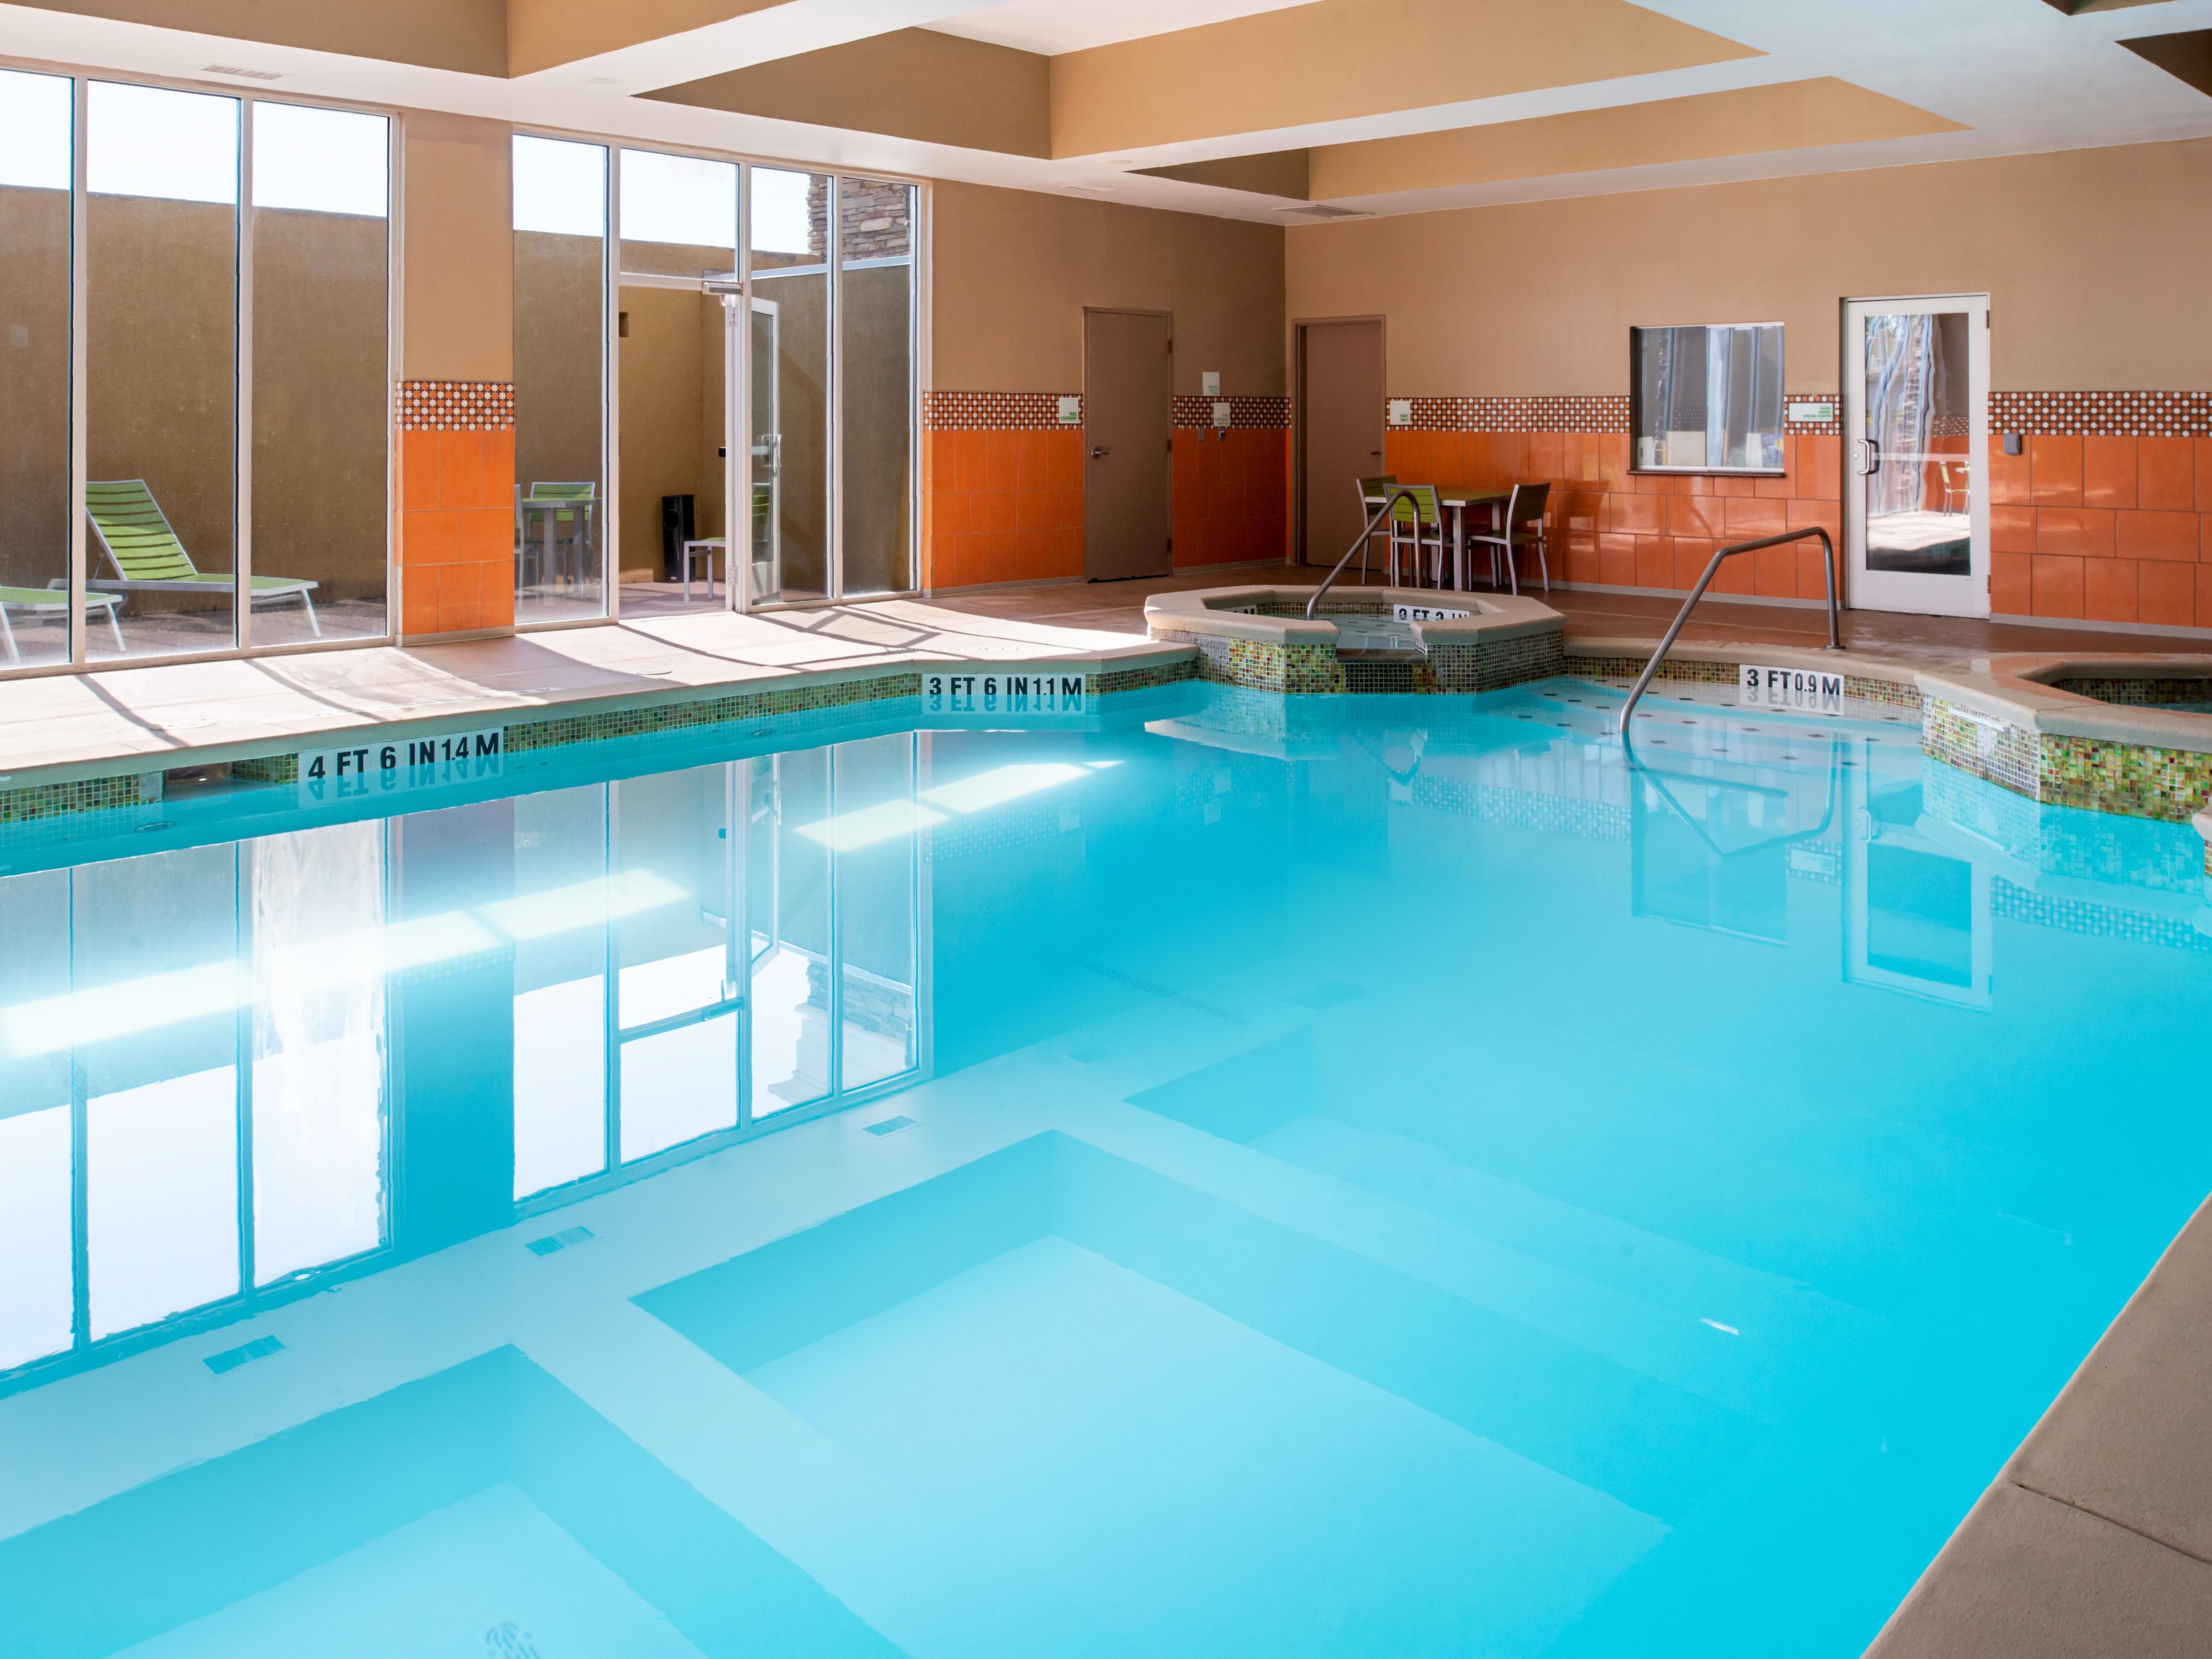 Get your workout in or unwind after a productive day in the Amarillo area with a dip in our indoor pool. We offer plenty of poolside seating and towels. Our fitness facilities also include a 24-hour gym with cardio machines and free weights. No matter how long you're staying with us, we make it easy to maintain your workout routine during travel.
